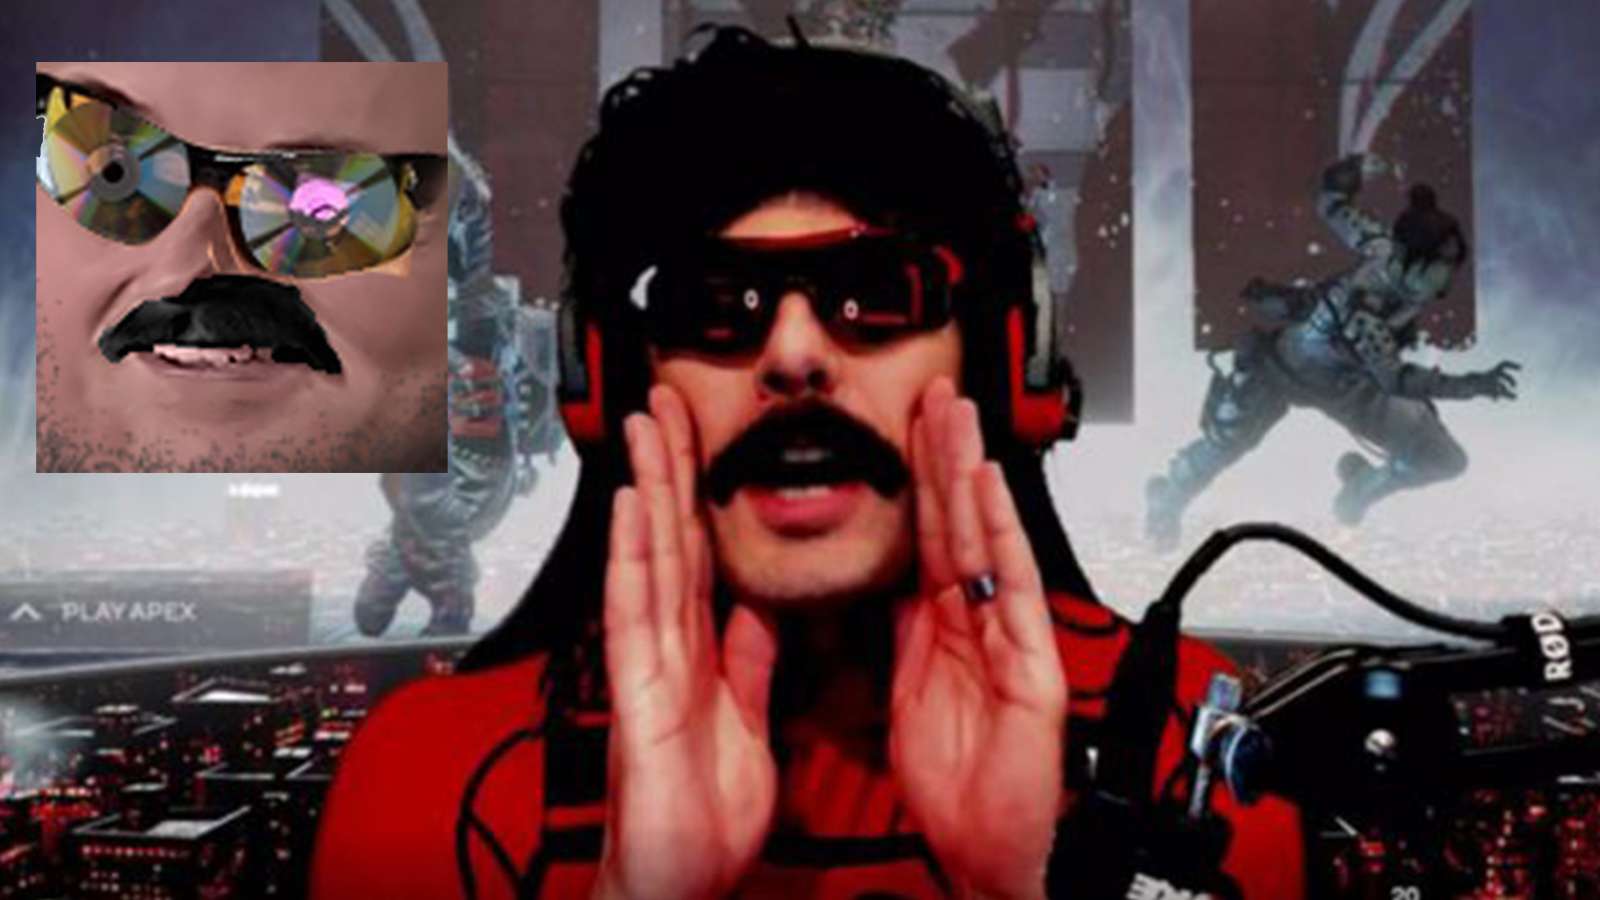 Dr Disrespect and the ForsenCD emote.